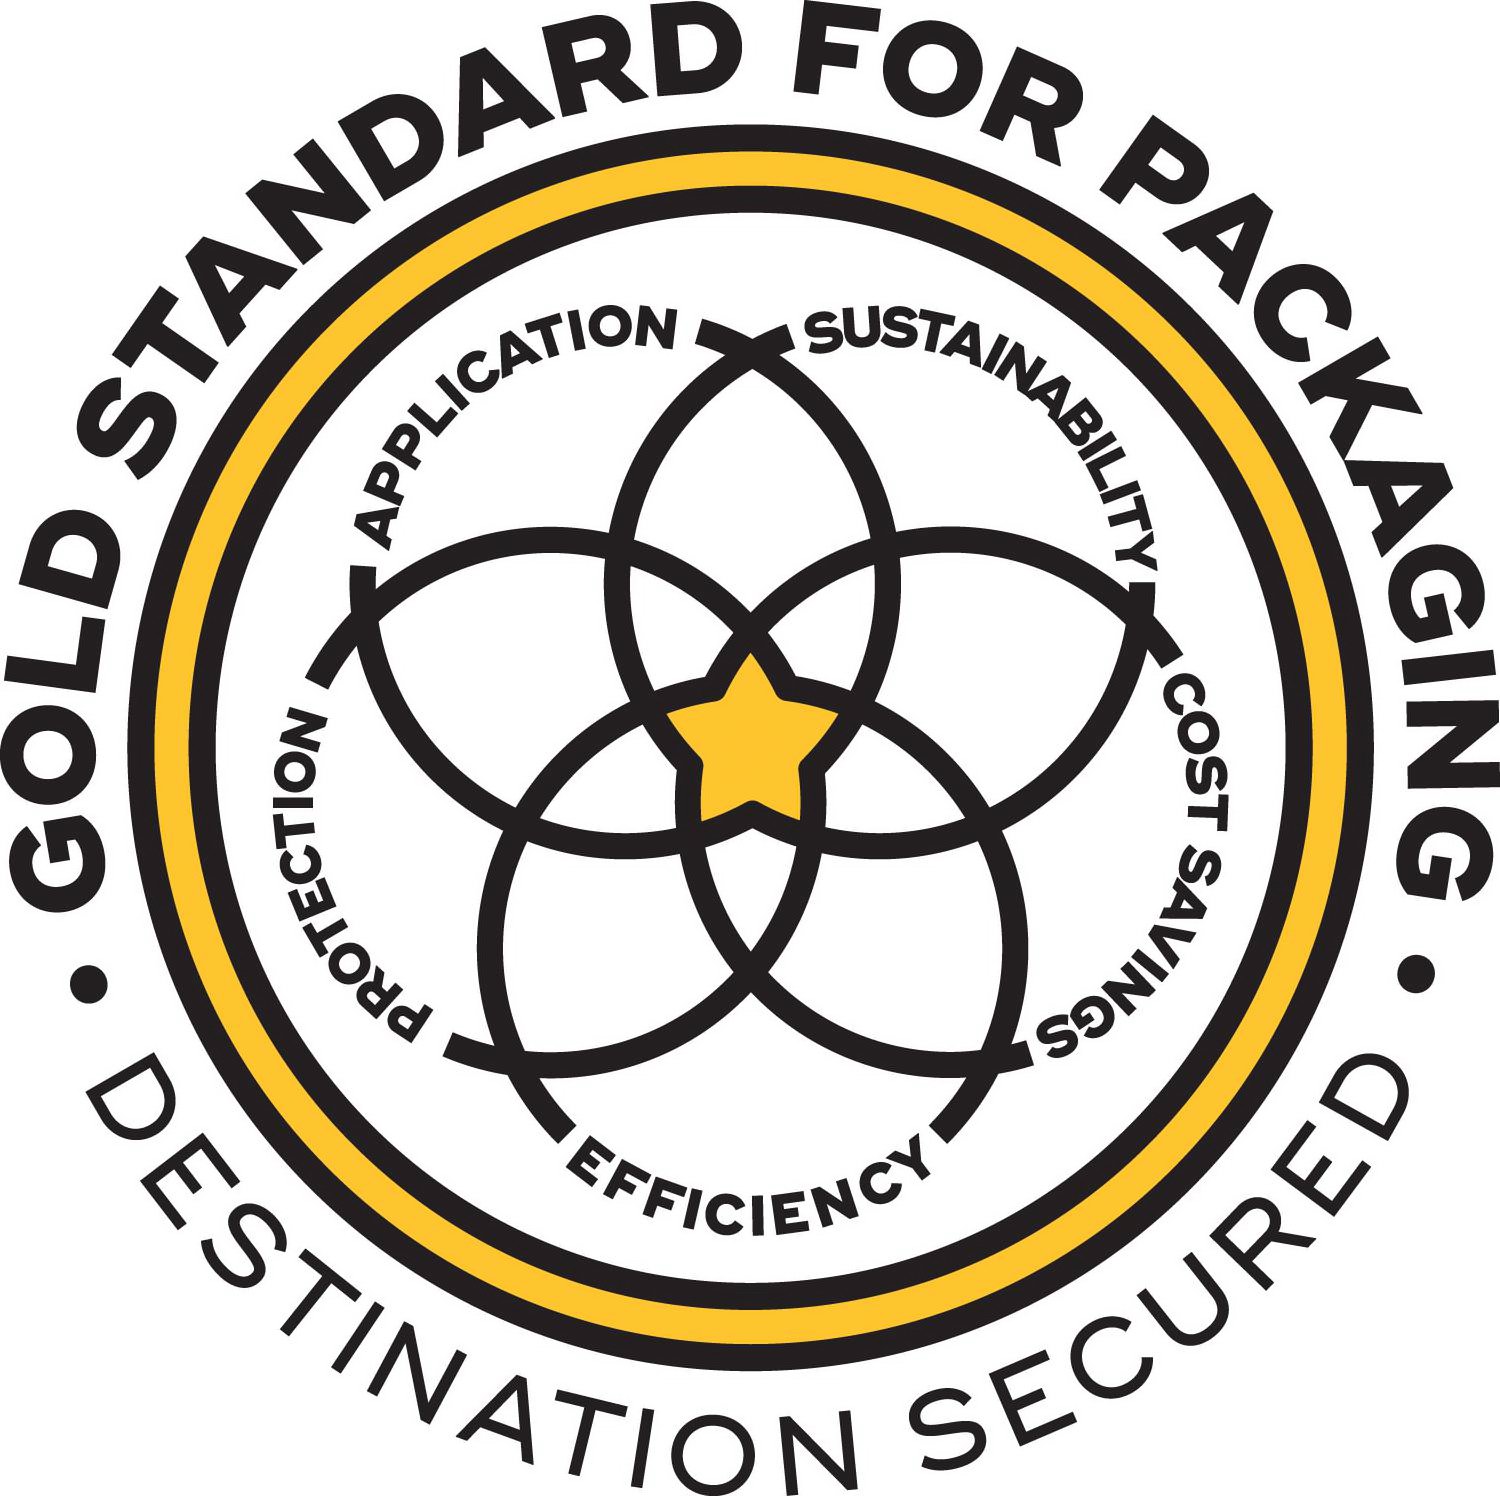  GOLD STANDARD FOR PACKAGING DESTINATION SECURED SUSTAINABILITY COST SAVINGS EFFICIENCY PROTECTION APPLICATION